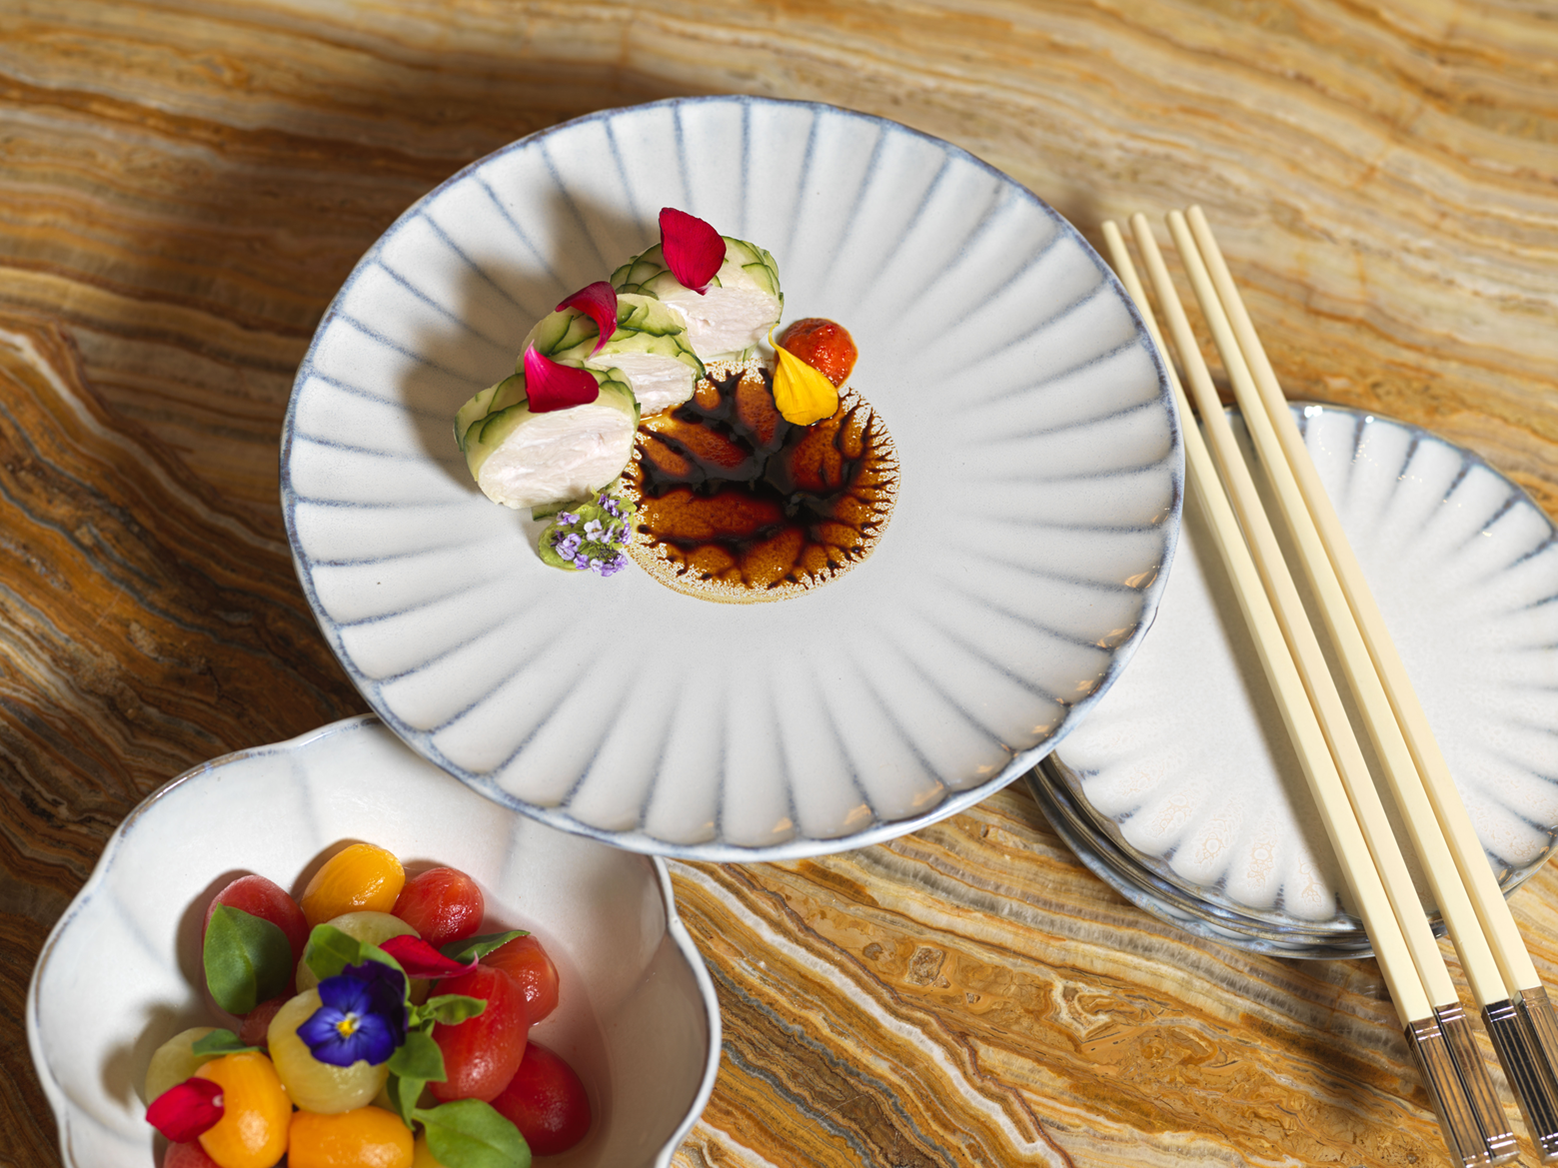 teahouse dishes
